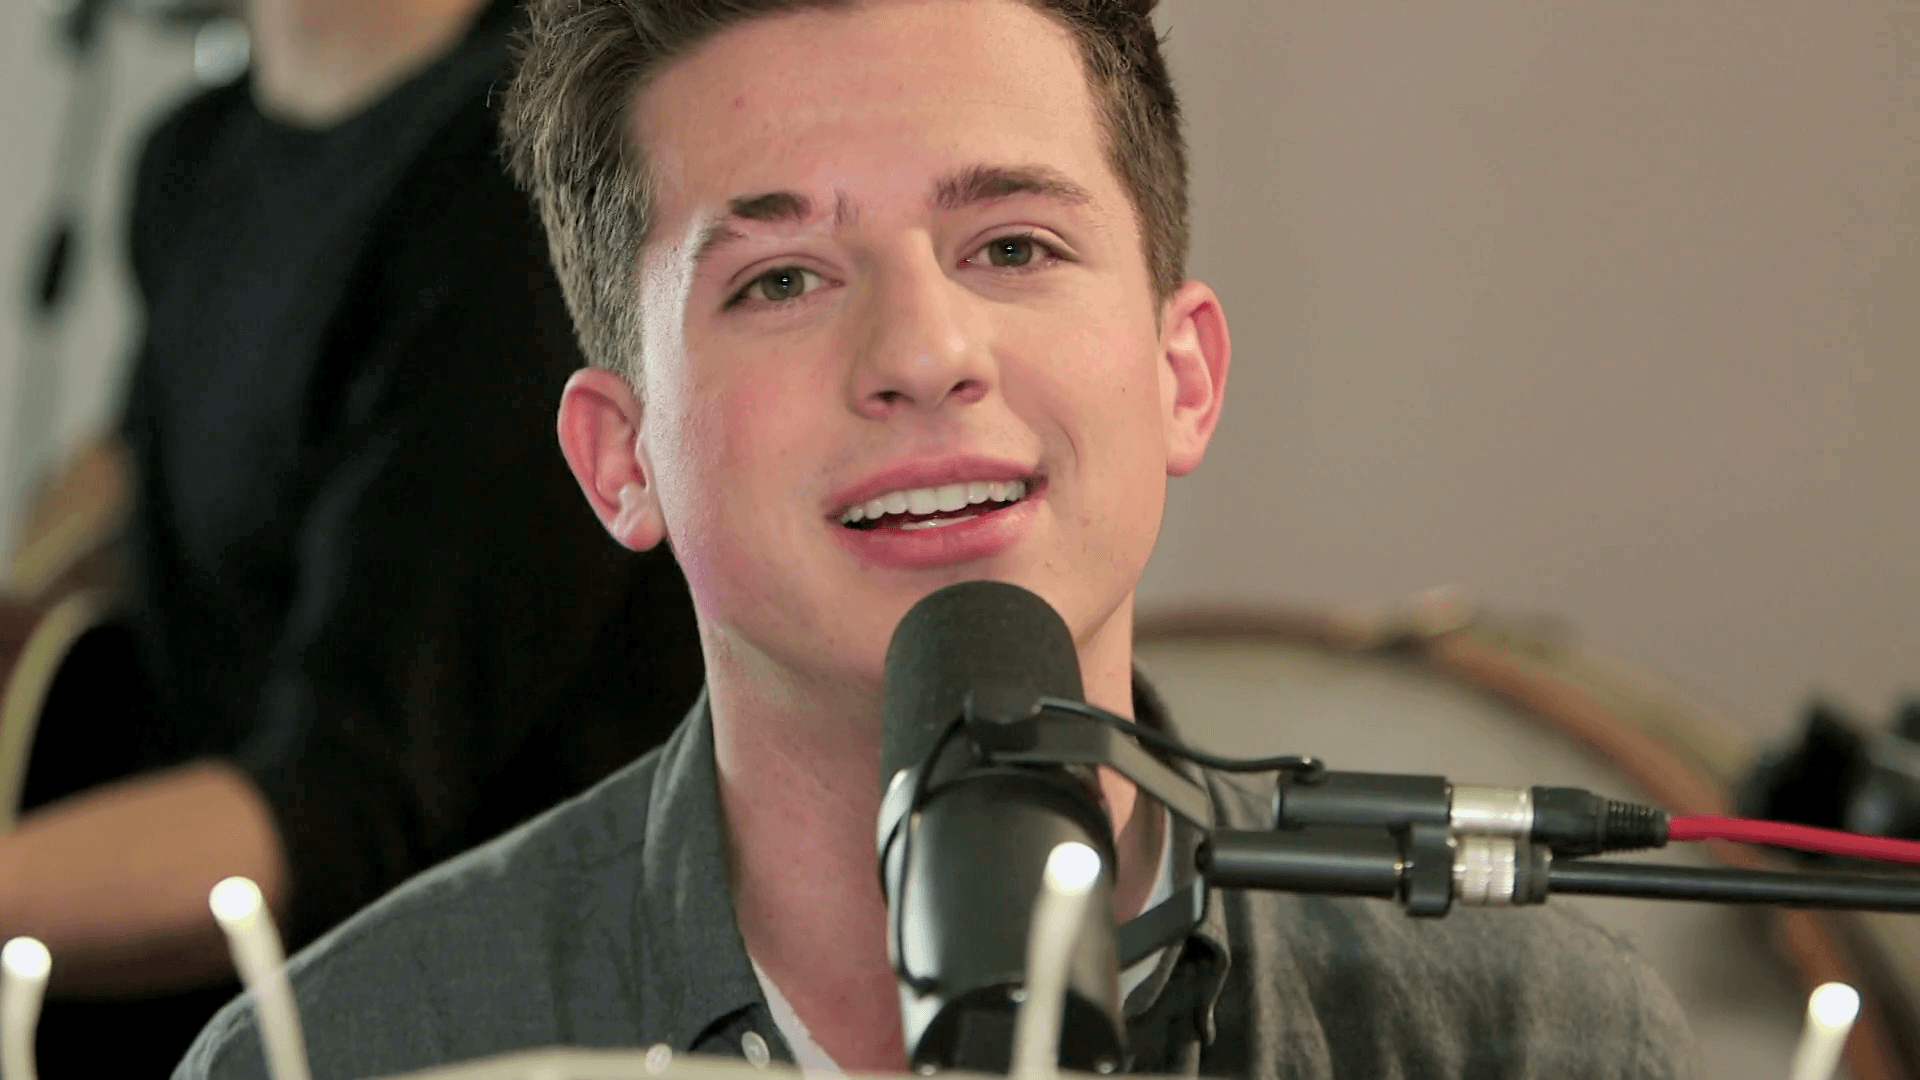 Charlie puth dad - 🧡 Charlie Puth’s "One Call Away" Reached a Ma...